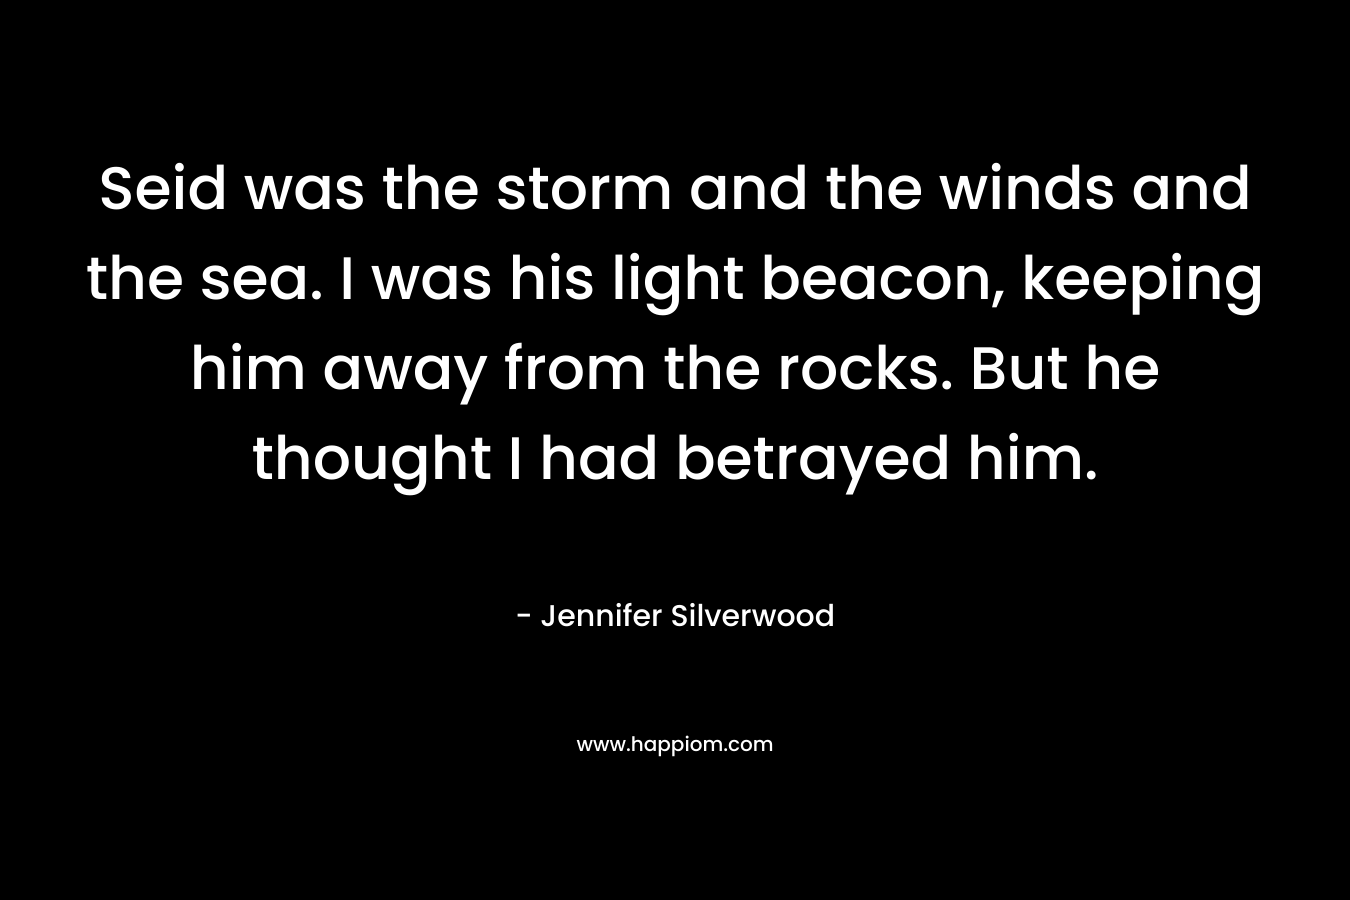 Seid was the storm and the winds and the sea. I was his light beacon, keeping him away from the rocks. But he thought I had betrayed him. – Jennifer Silverwood